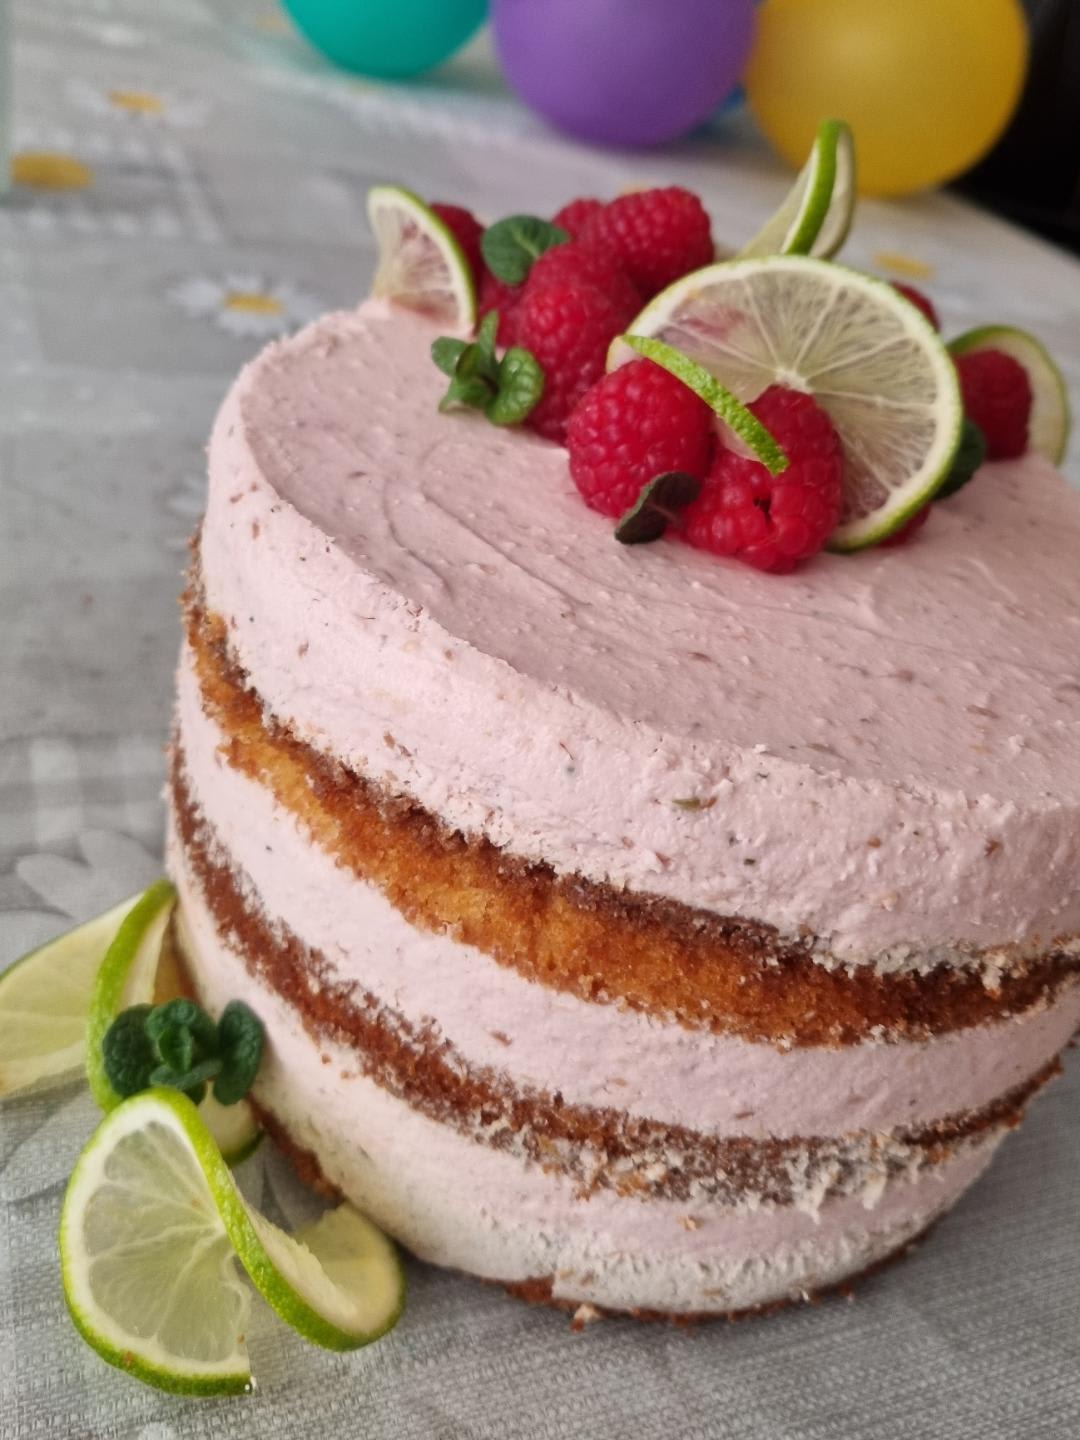 Raspberry-lime peppermint cake waiting to be served